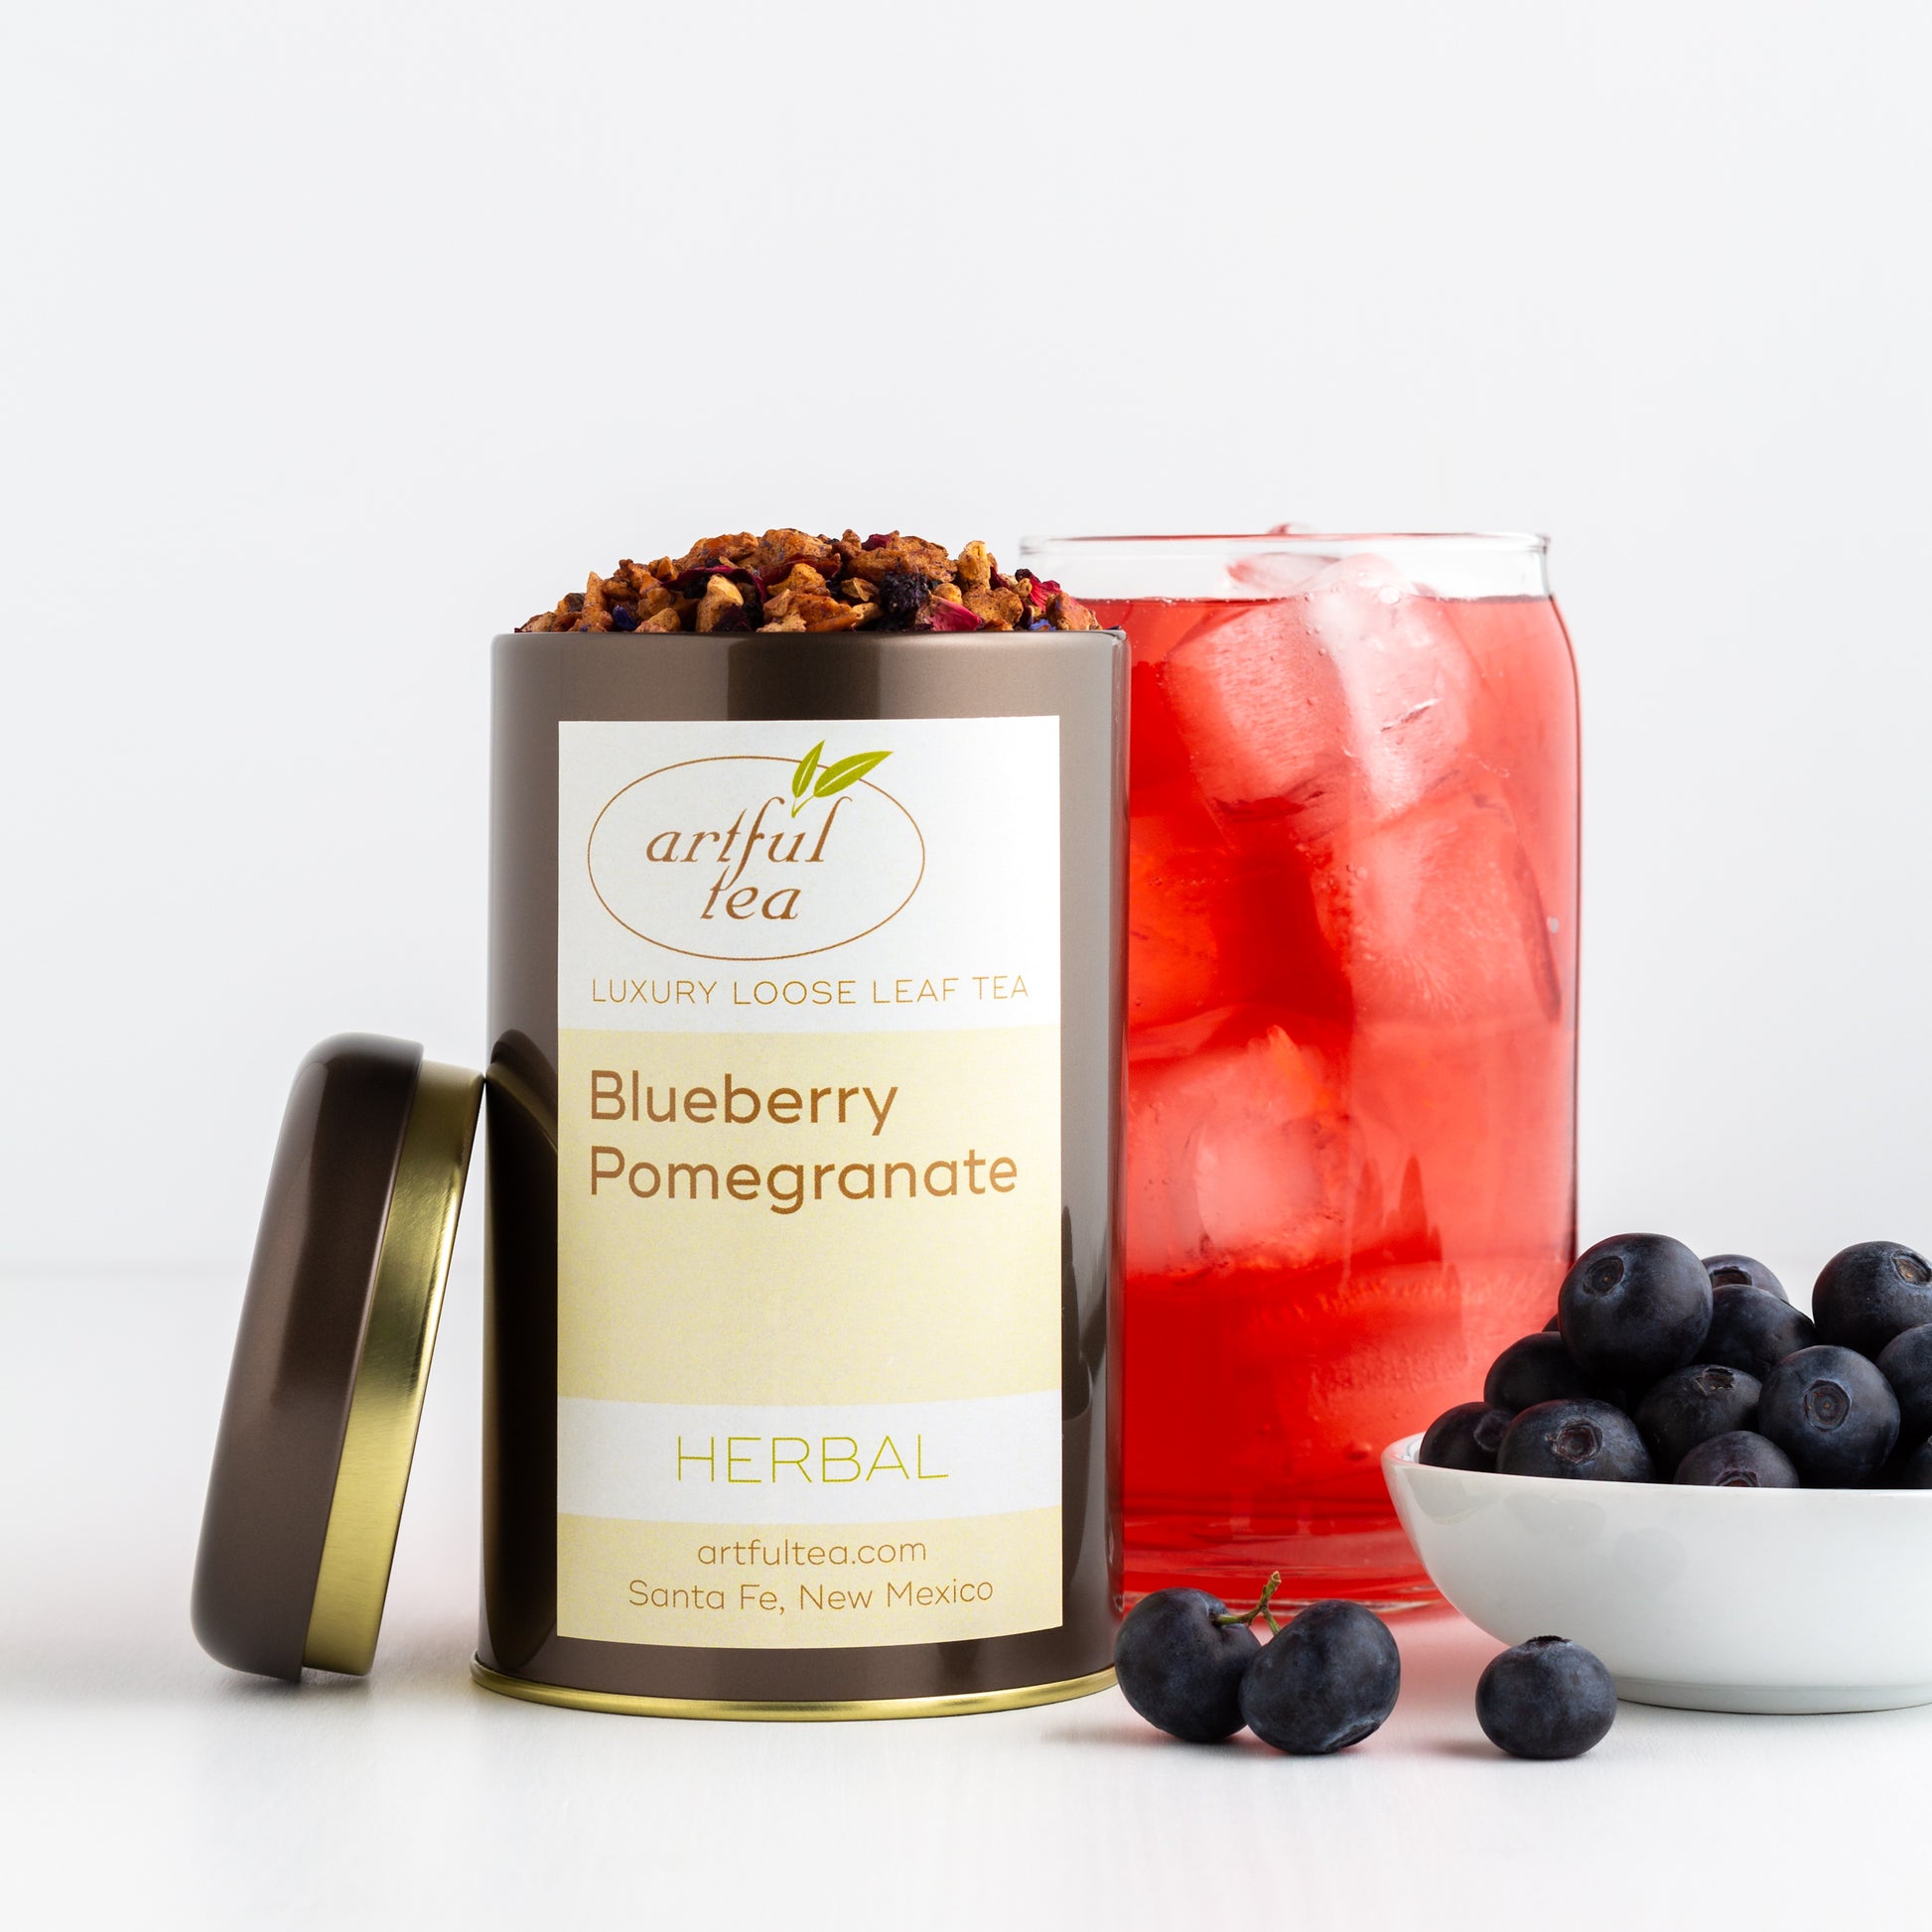 Blueberry Pomegranate Herbal Tea shown packaged in a brown tin with the lid off, displayed next to a tall glass of iced tea and a bowl of fresh blueberries